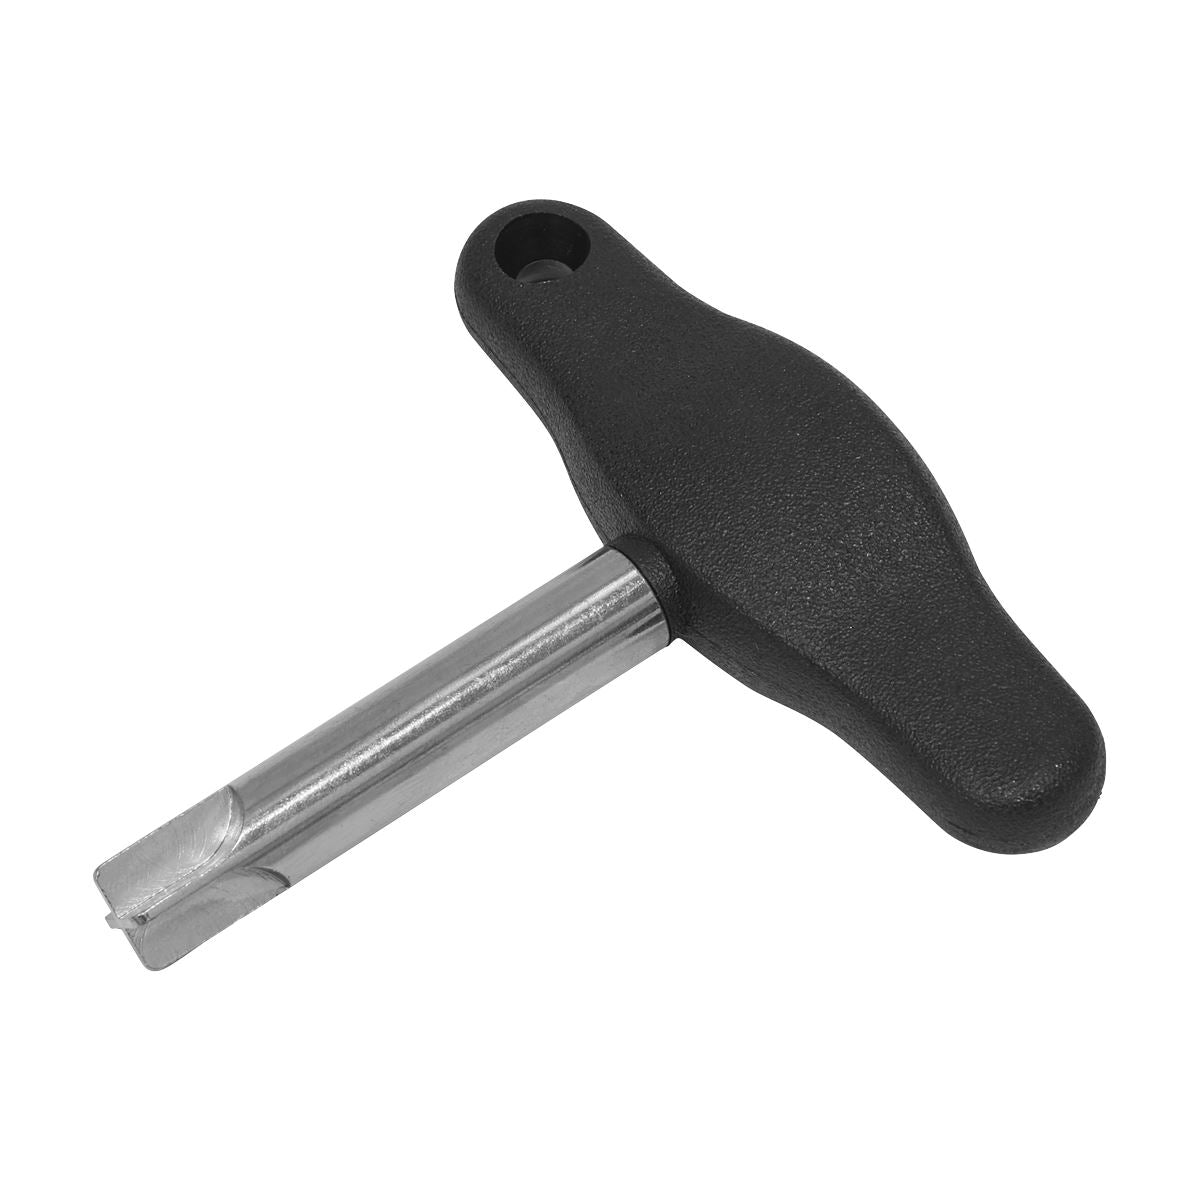 Sealey T-Handle Vehicle Service Screwdriver 1.8mm